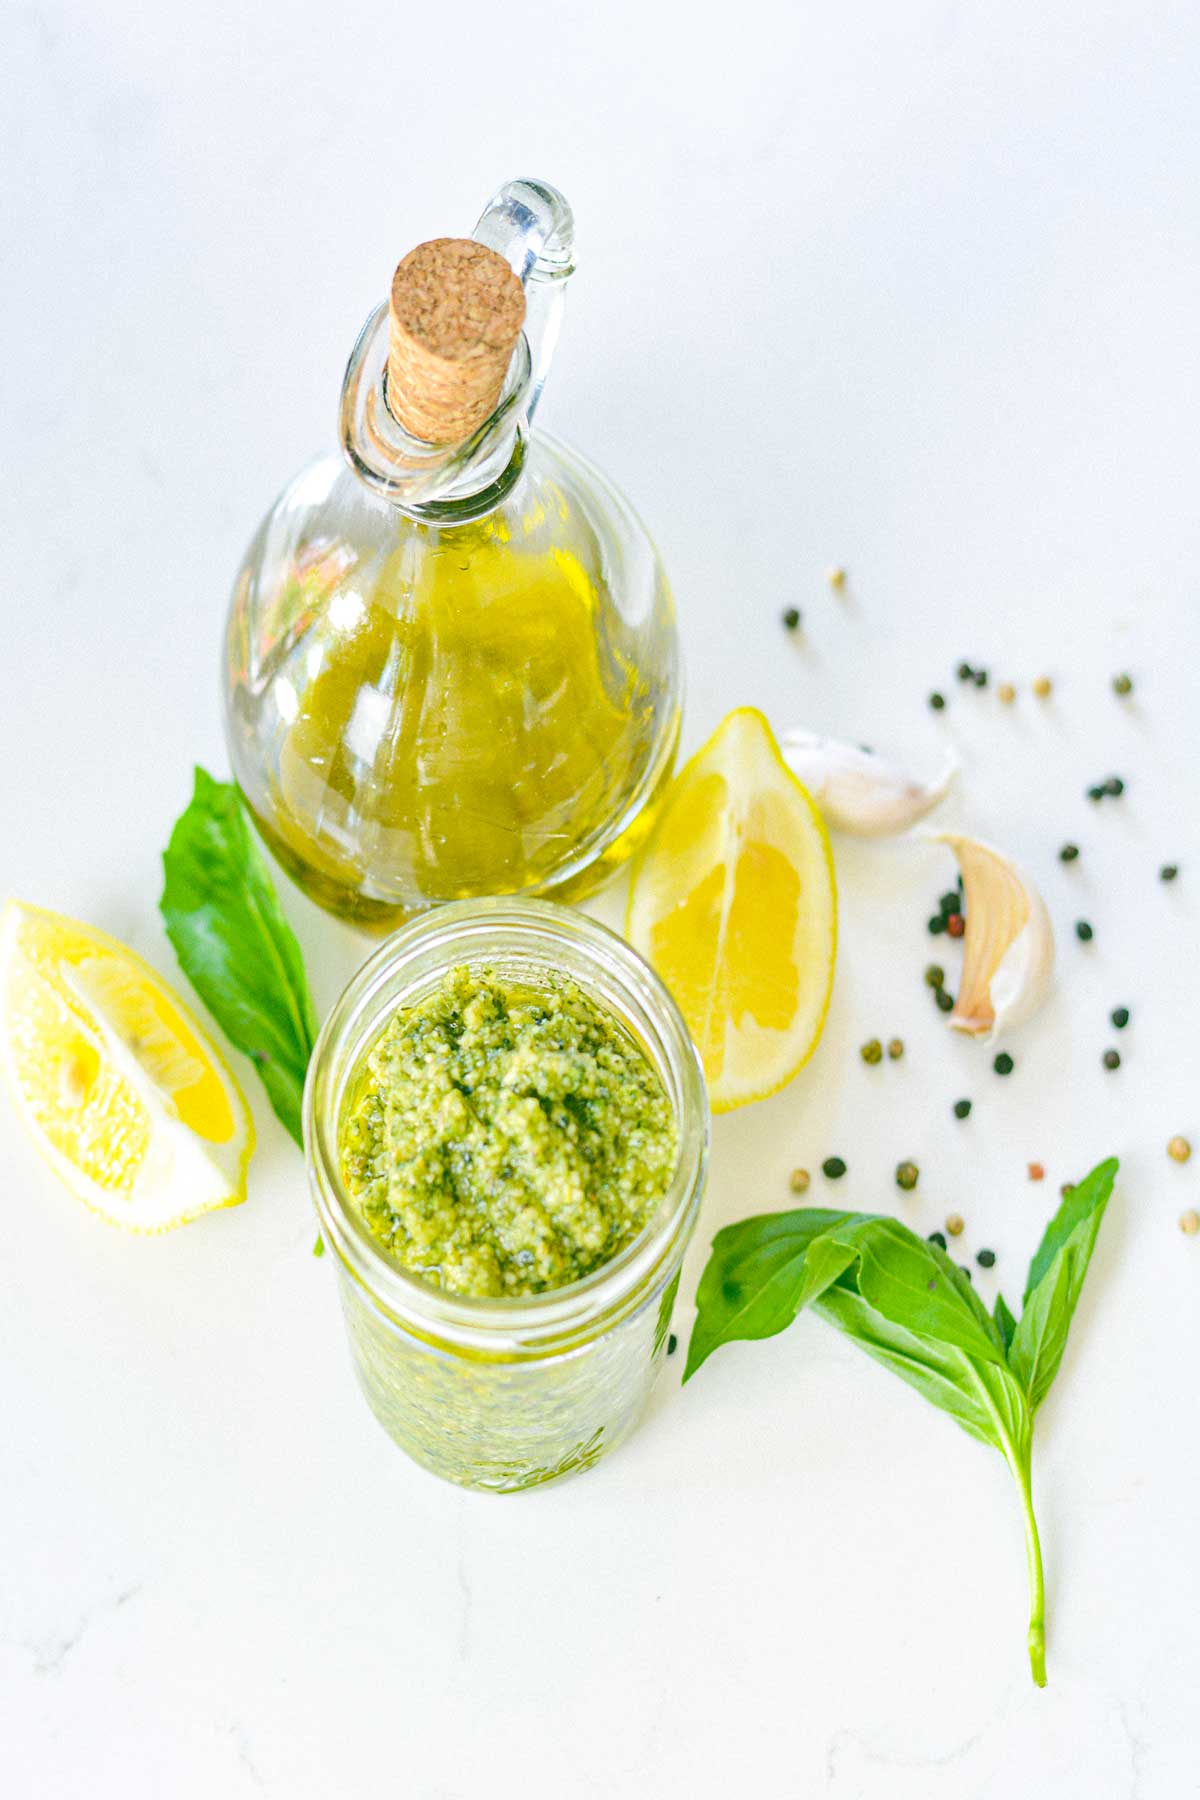 How to Make a Mouthwatering Basil Pesto